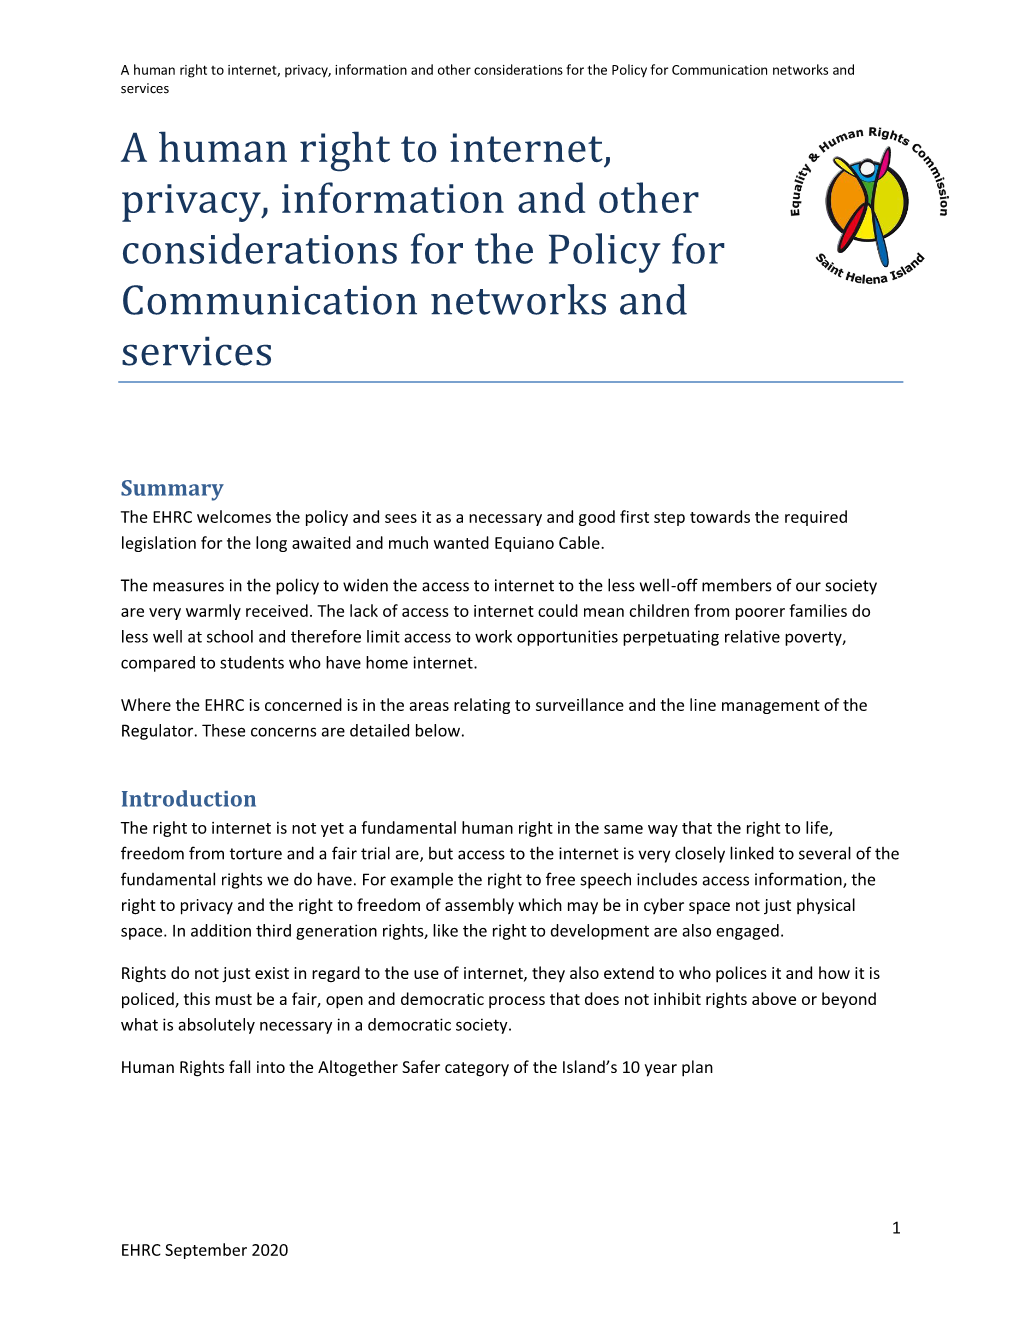 A Human Right to Internet, Privacy, Information and Other Considerations for the Policy for Communication Networks and Services